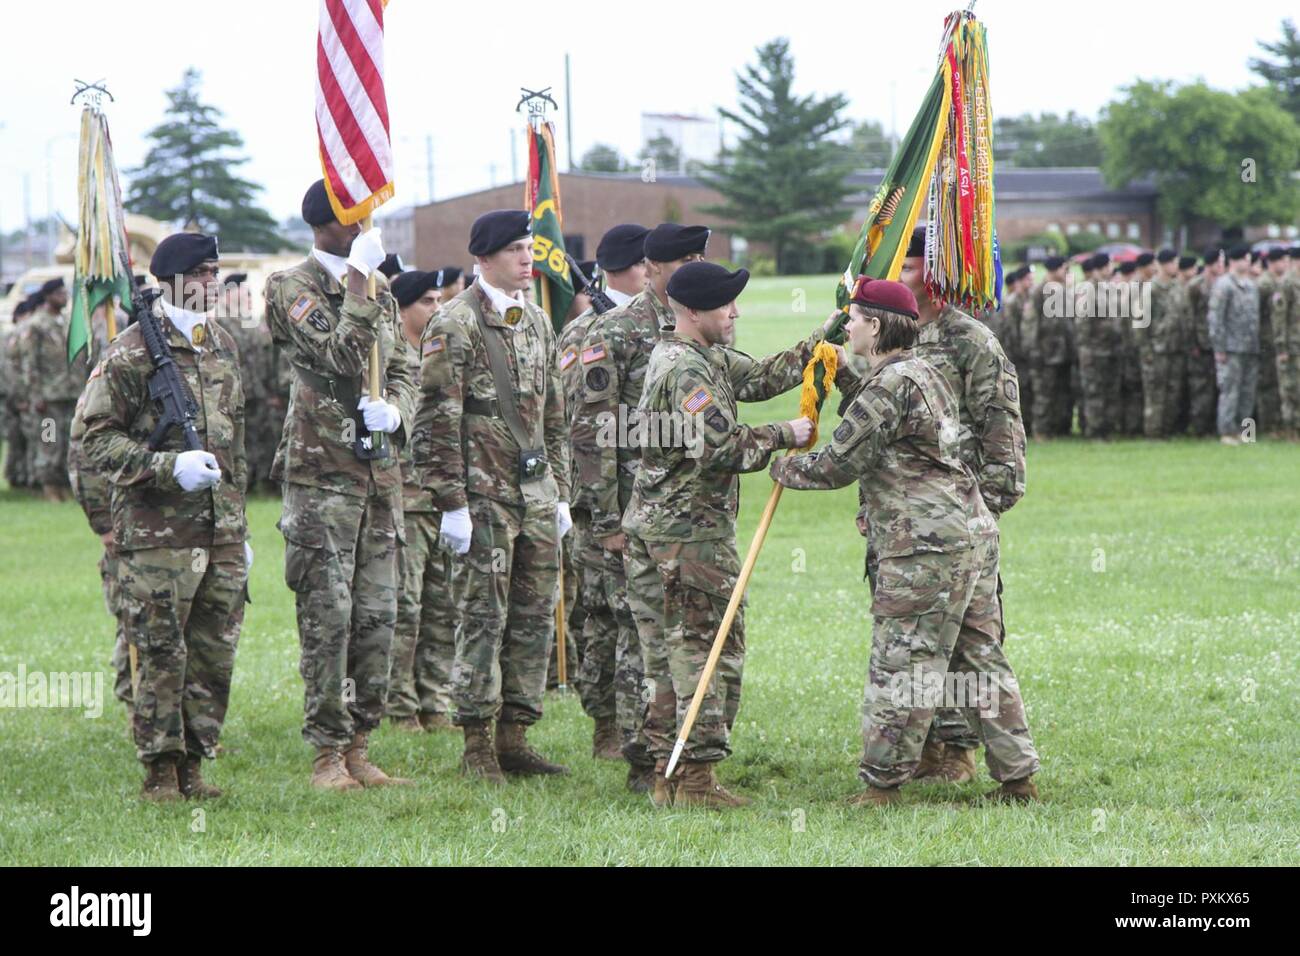 Col. Eugenia Guilmartin, commander of the 16th Military Police Brigade, hands Lt. Col. S. Joel Schuldt, commander of the 716th MP Battalion assigned to the 16th MP Bde. and attached to the 101st Airborne Division (Air Assault) Sustainment Brigade, 101st Abn. Div., the battalion colors during the change of command ceremony, June 15, 2017, at the division parade field on Fort Campbell, Kentucky. Stock Photo